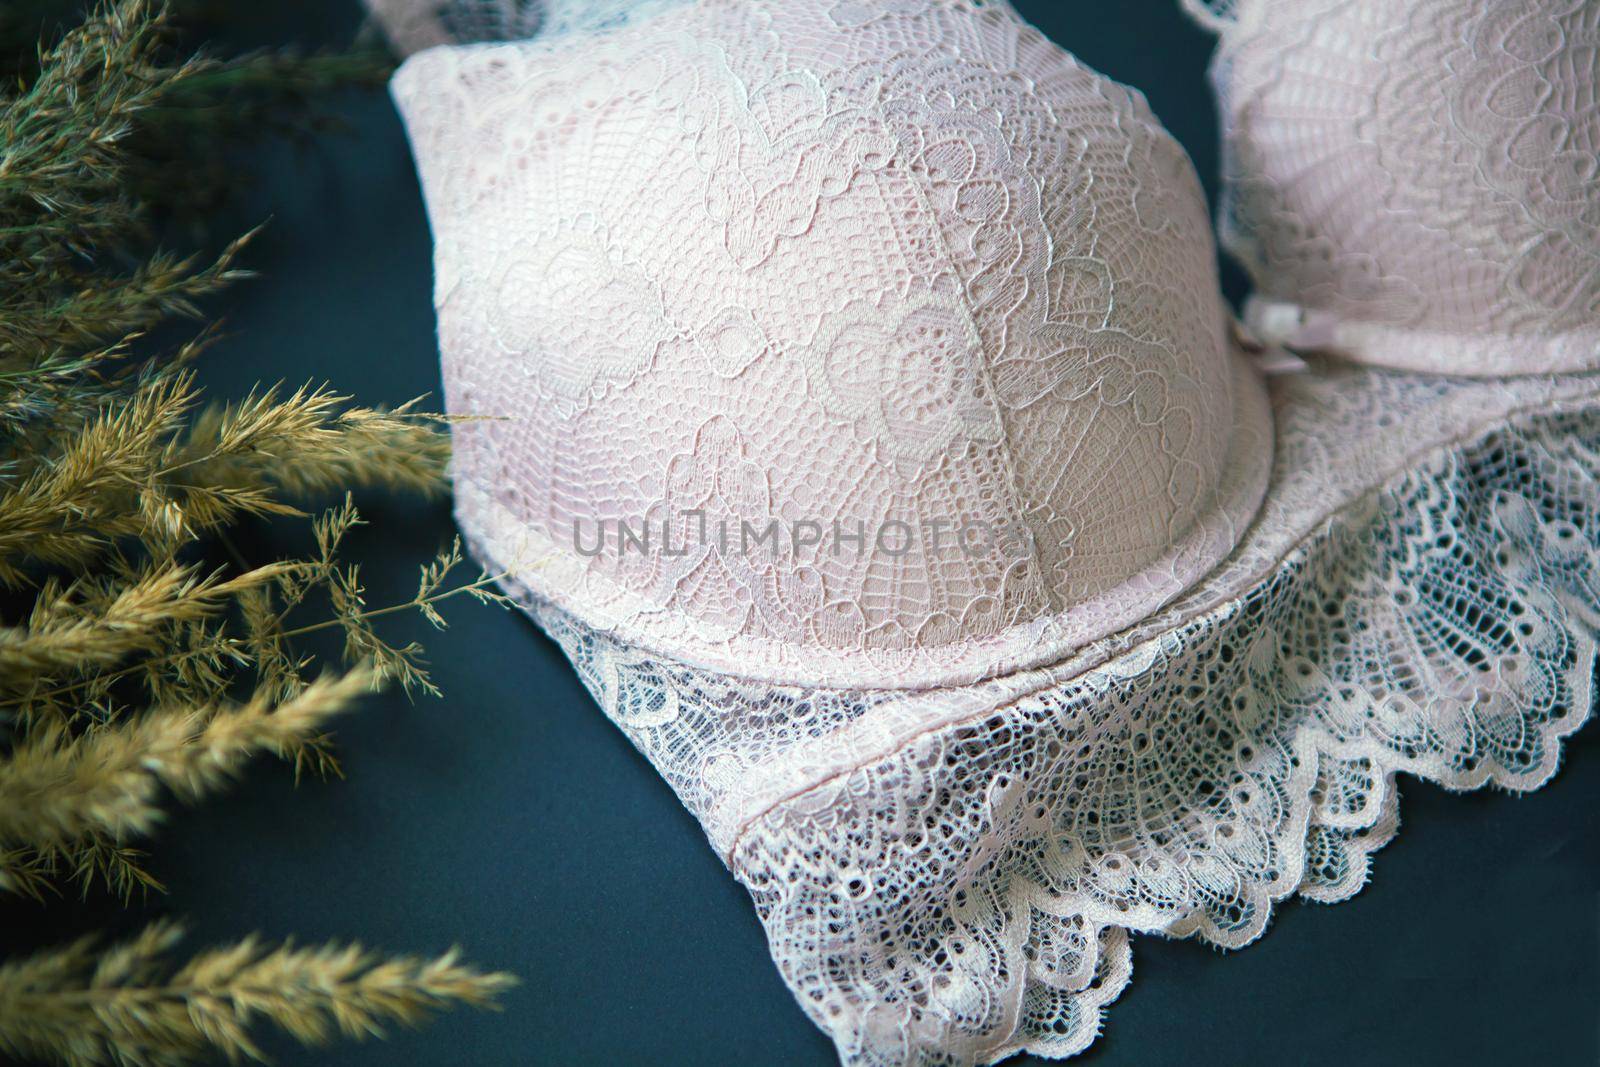 Cotton pink bra lace. Womens lingerie close up on black background near pampas grass. fashionable underwear. Natural soft fabric